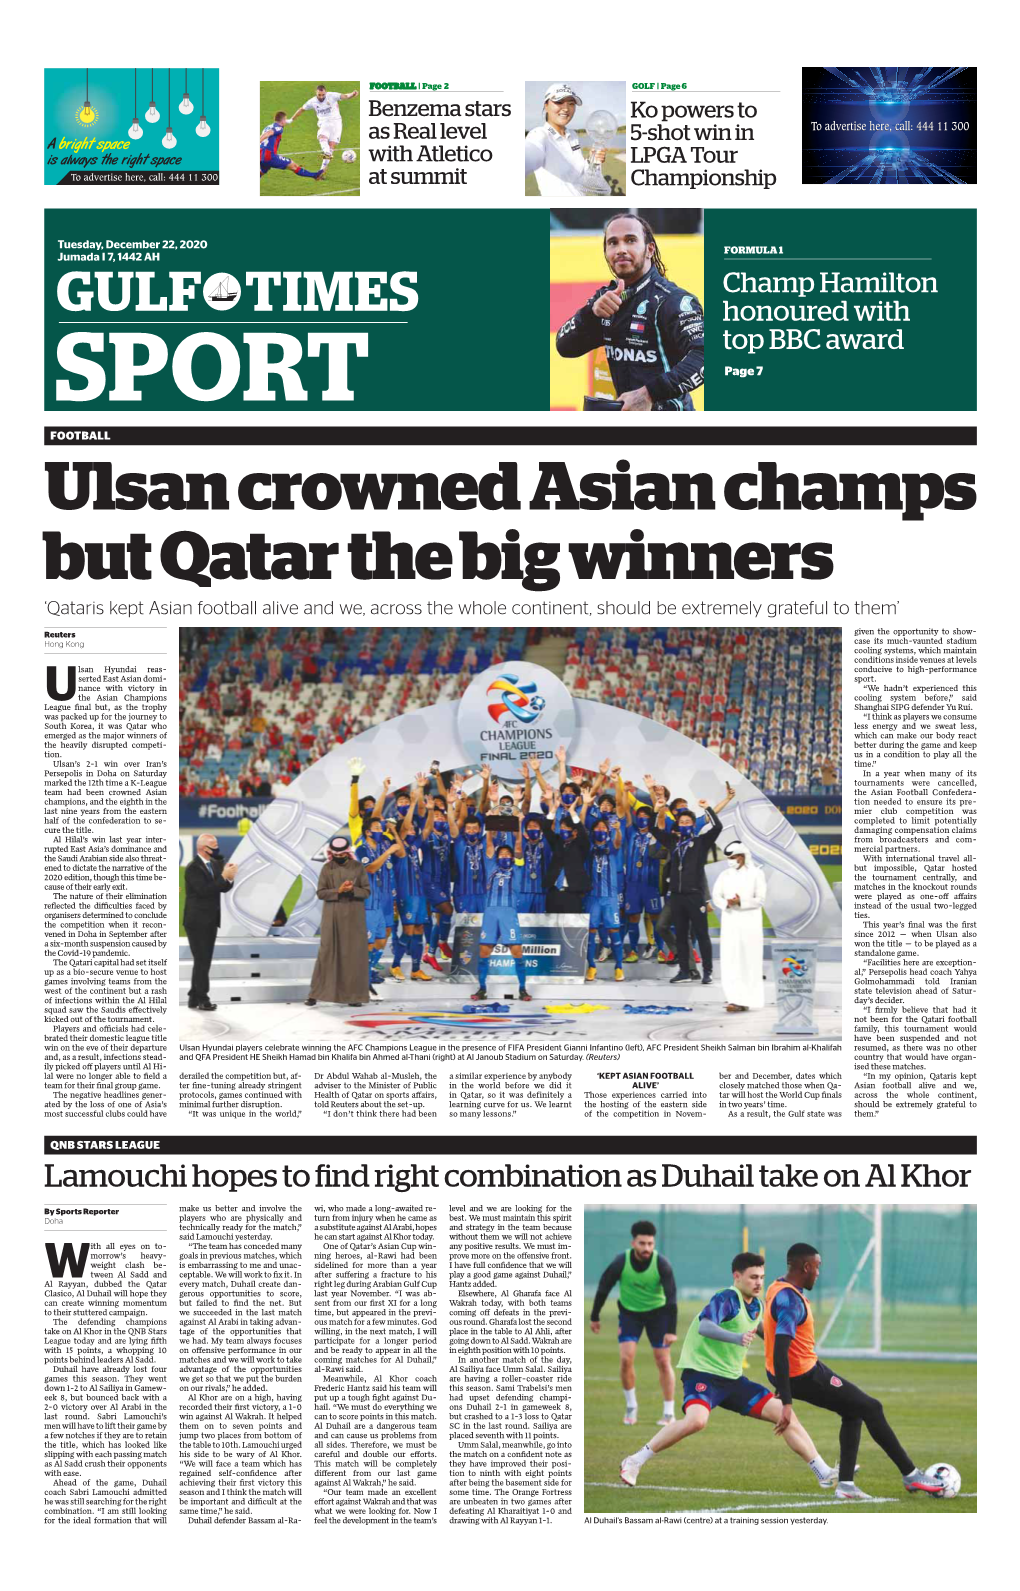 Ulsan Crowned Asian Champs but Qatar the Big Winners ‘Qataris Kept Asian Football Alive and We, Across the Whole Continent, Should Be Extremely Grateful to Them’